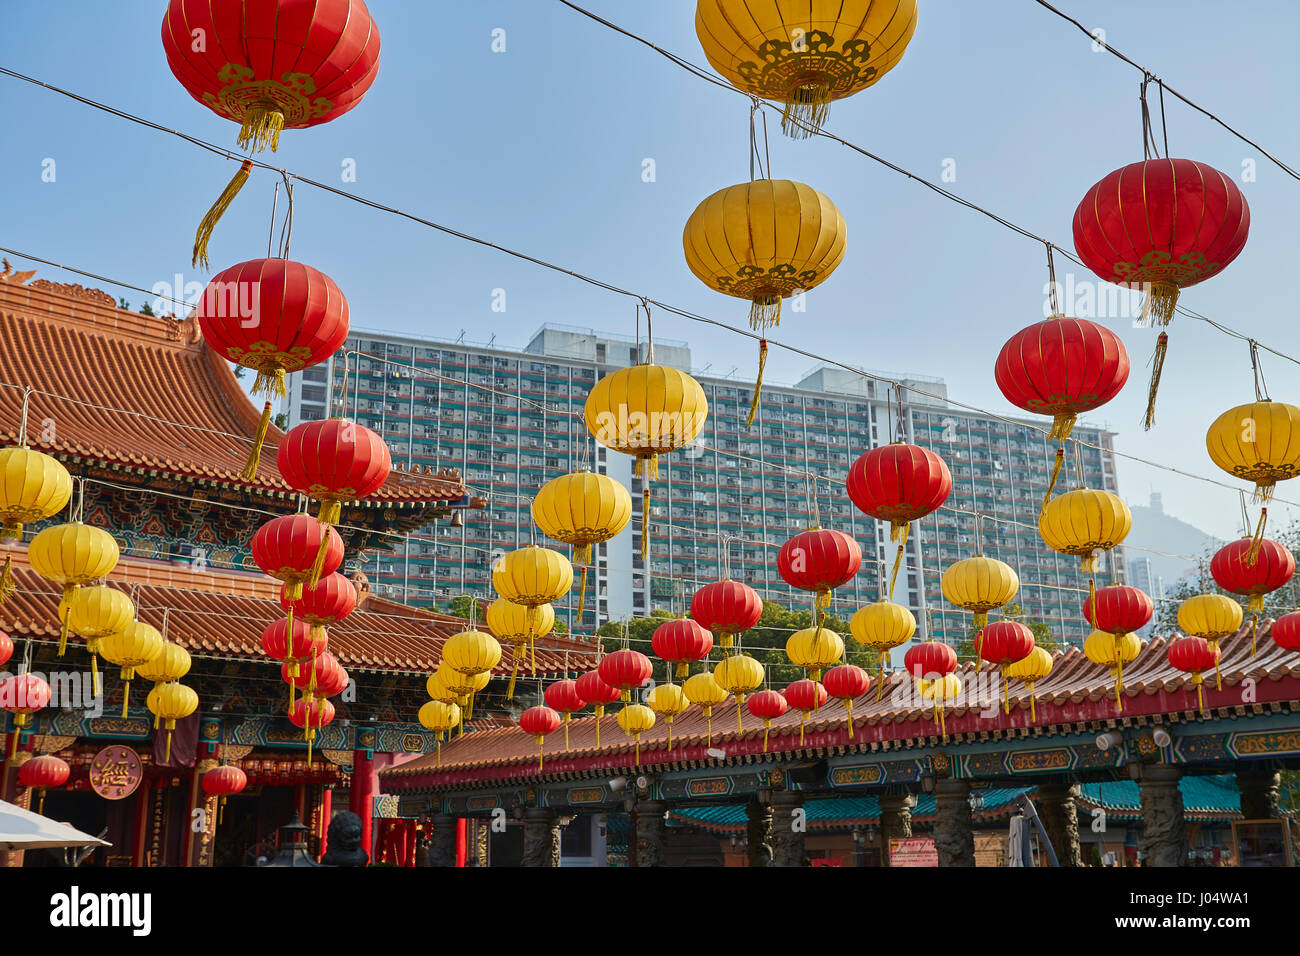 Traditional Chinese Paper Lanterns Contrast With A High Rise Apartment Building At The Wong Tai Sin Temple, Hong Kong. Stock Photo